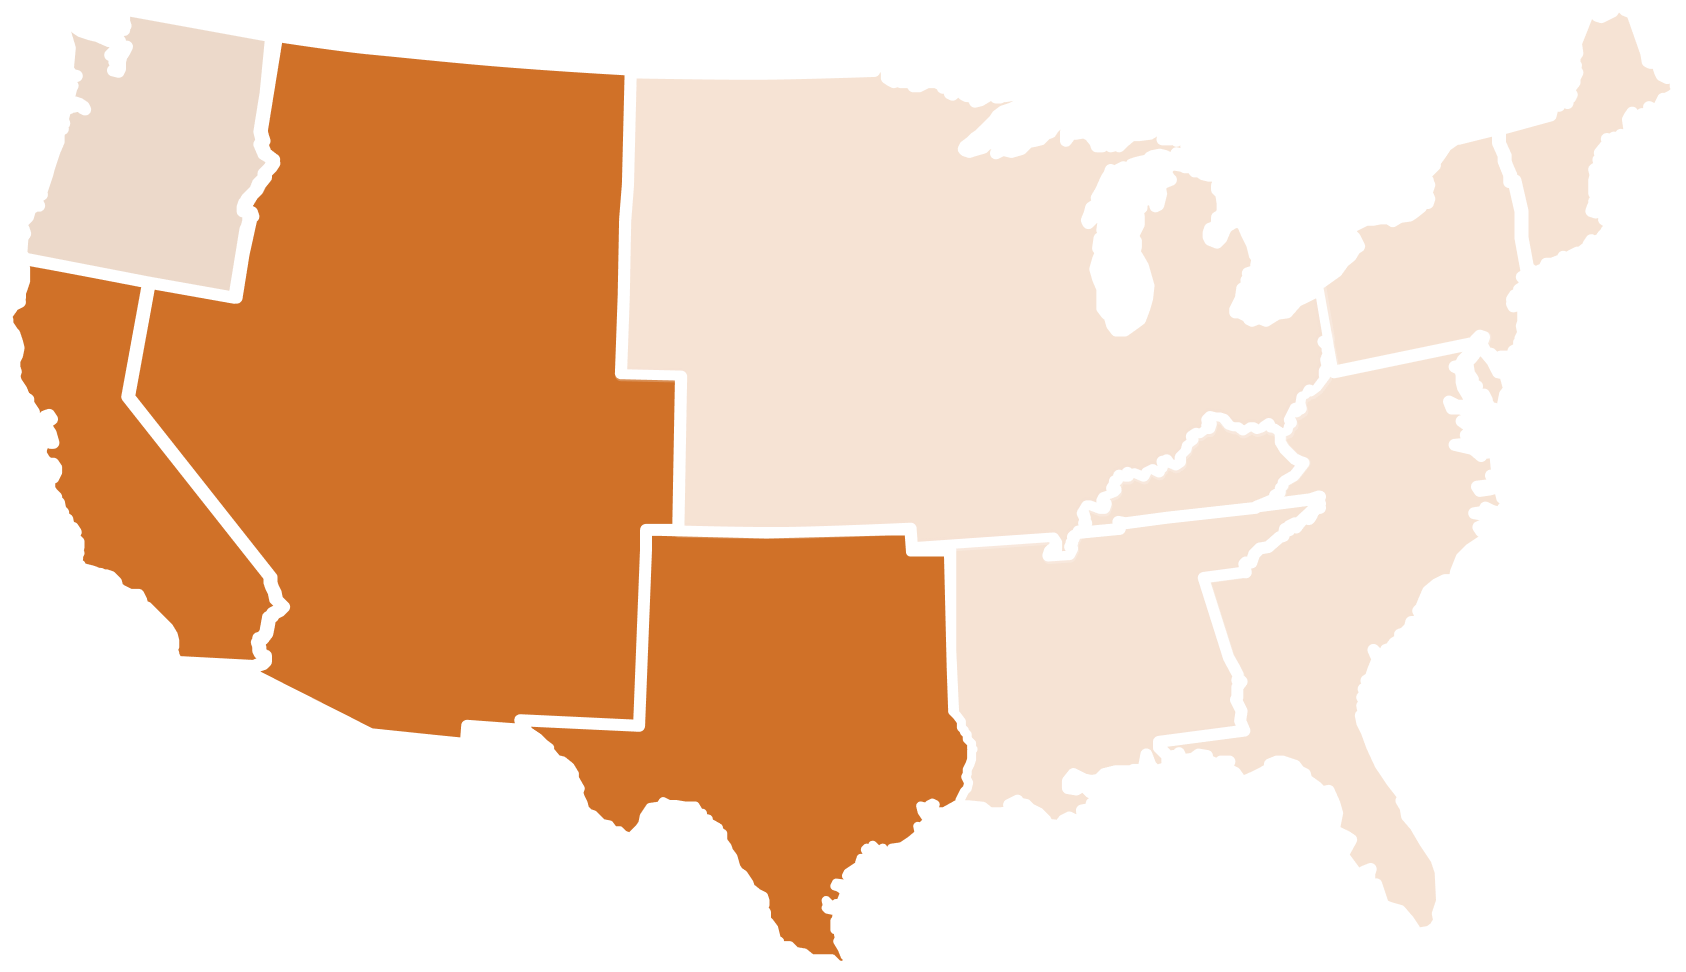 An outline of the United States of America with a the western portion of the country outlined in orange